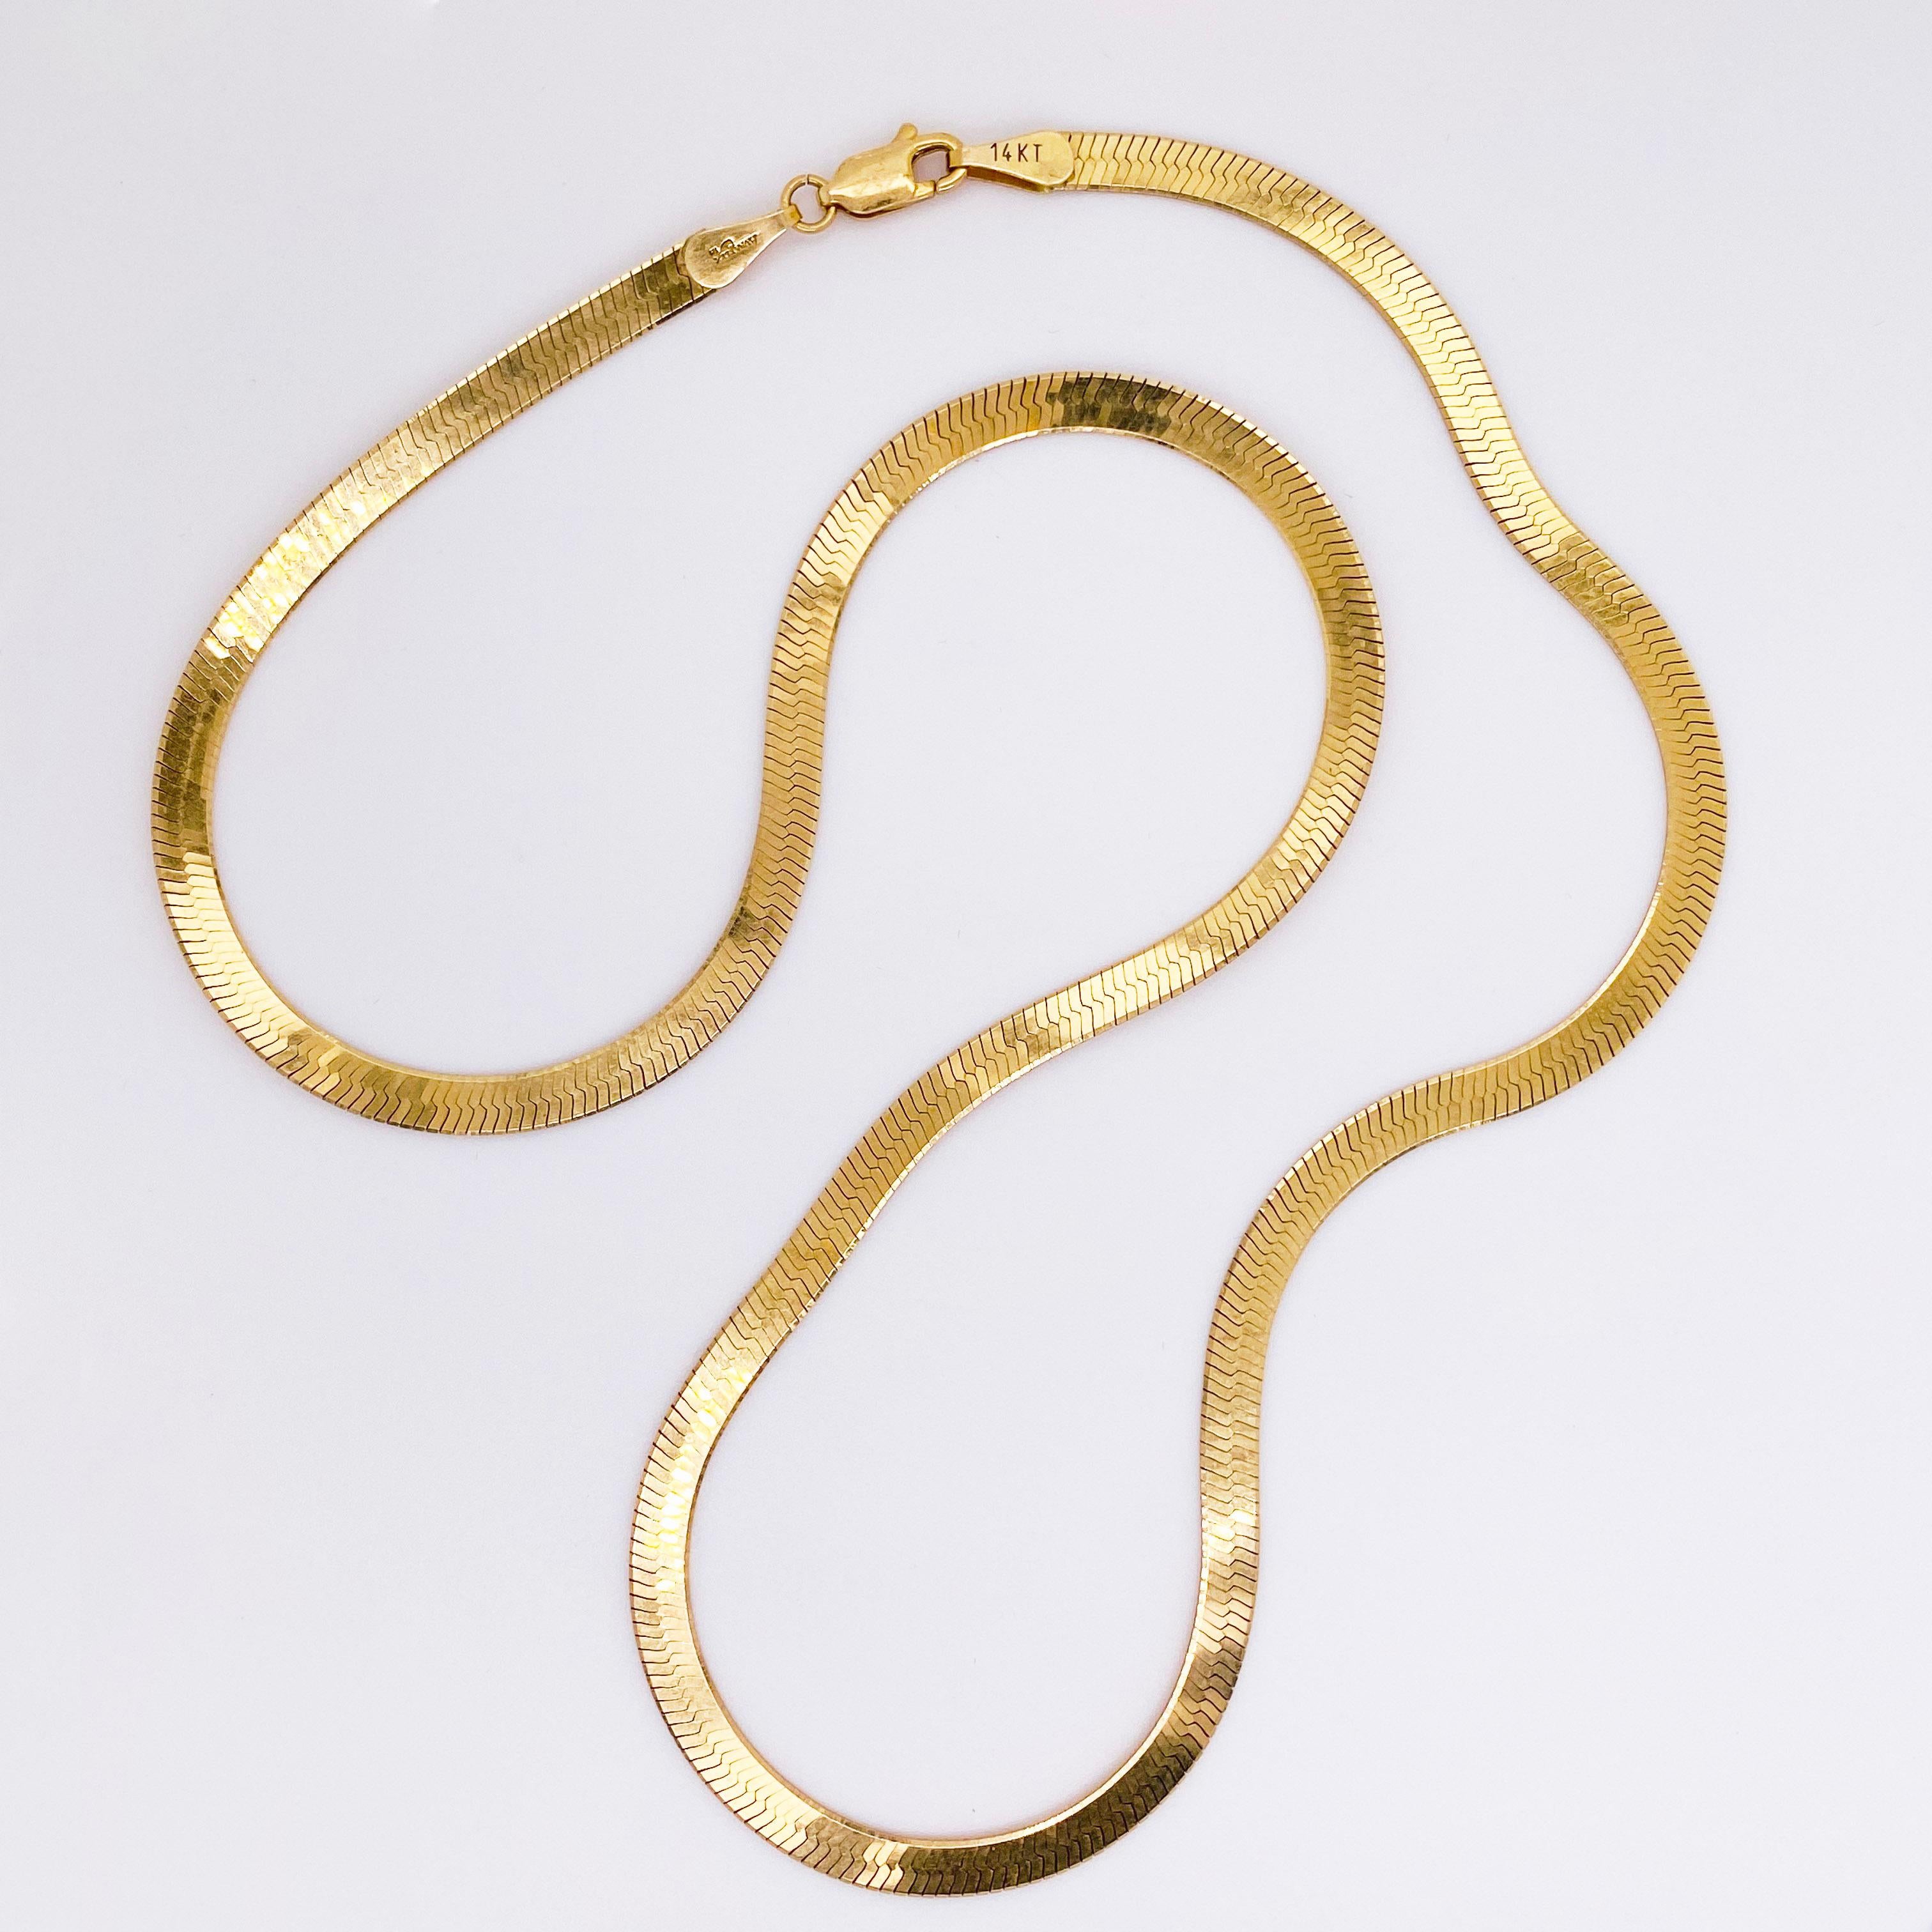 The herringbone chain, or flat gold chain style, which dates back to ancient Egyptian times, is a sophisticated design. It gets its name from the herringbone fish, a fish  known for their many parallel and slanted bones and this herringbone chain is